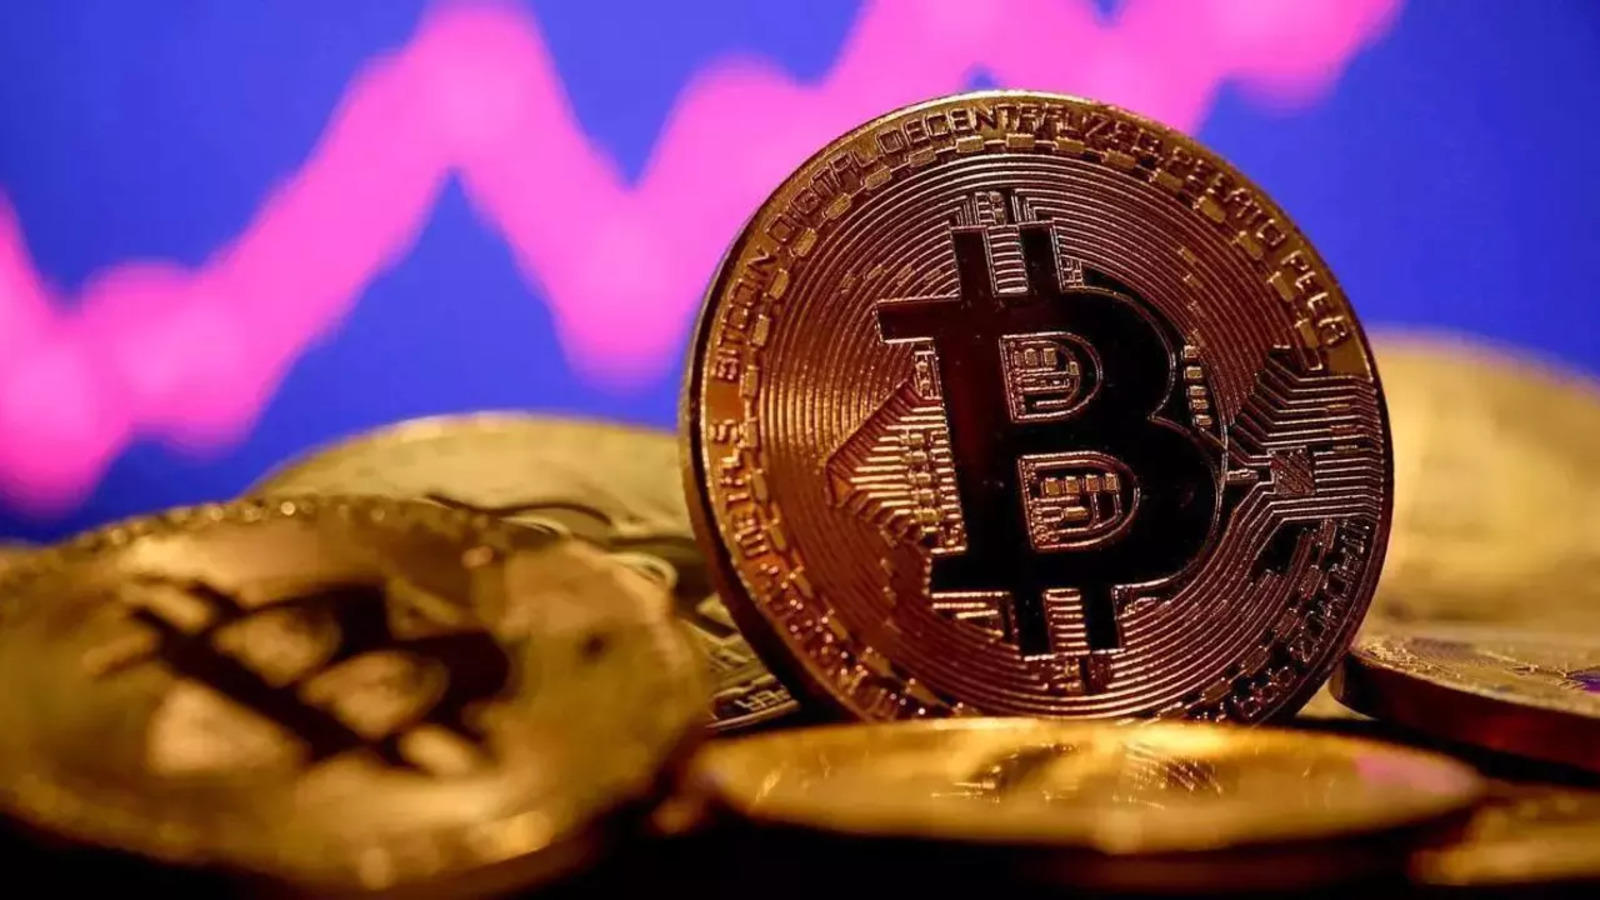 bitcoin: Bitcoin enters teenage, turns Rs 1, in Rs cr in 13 years - The Economic Times